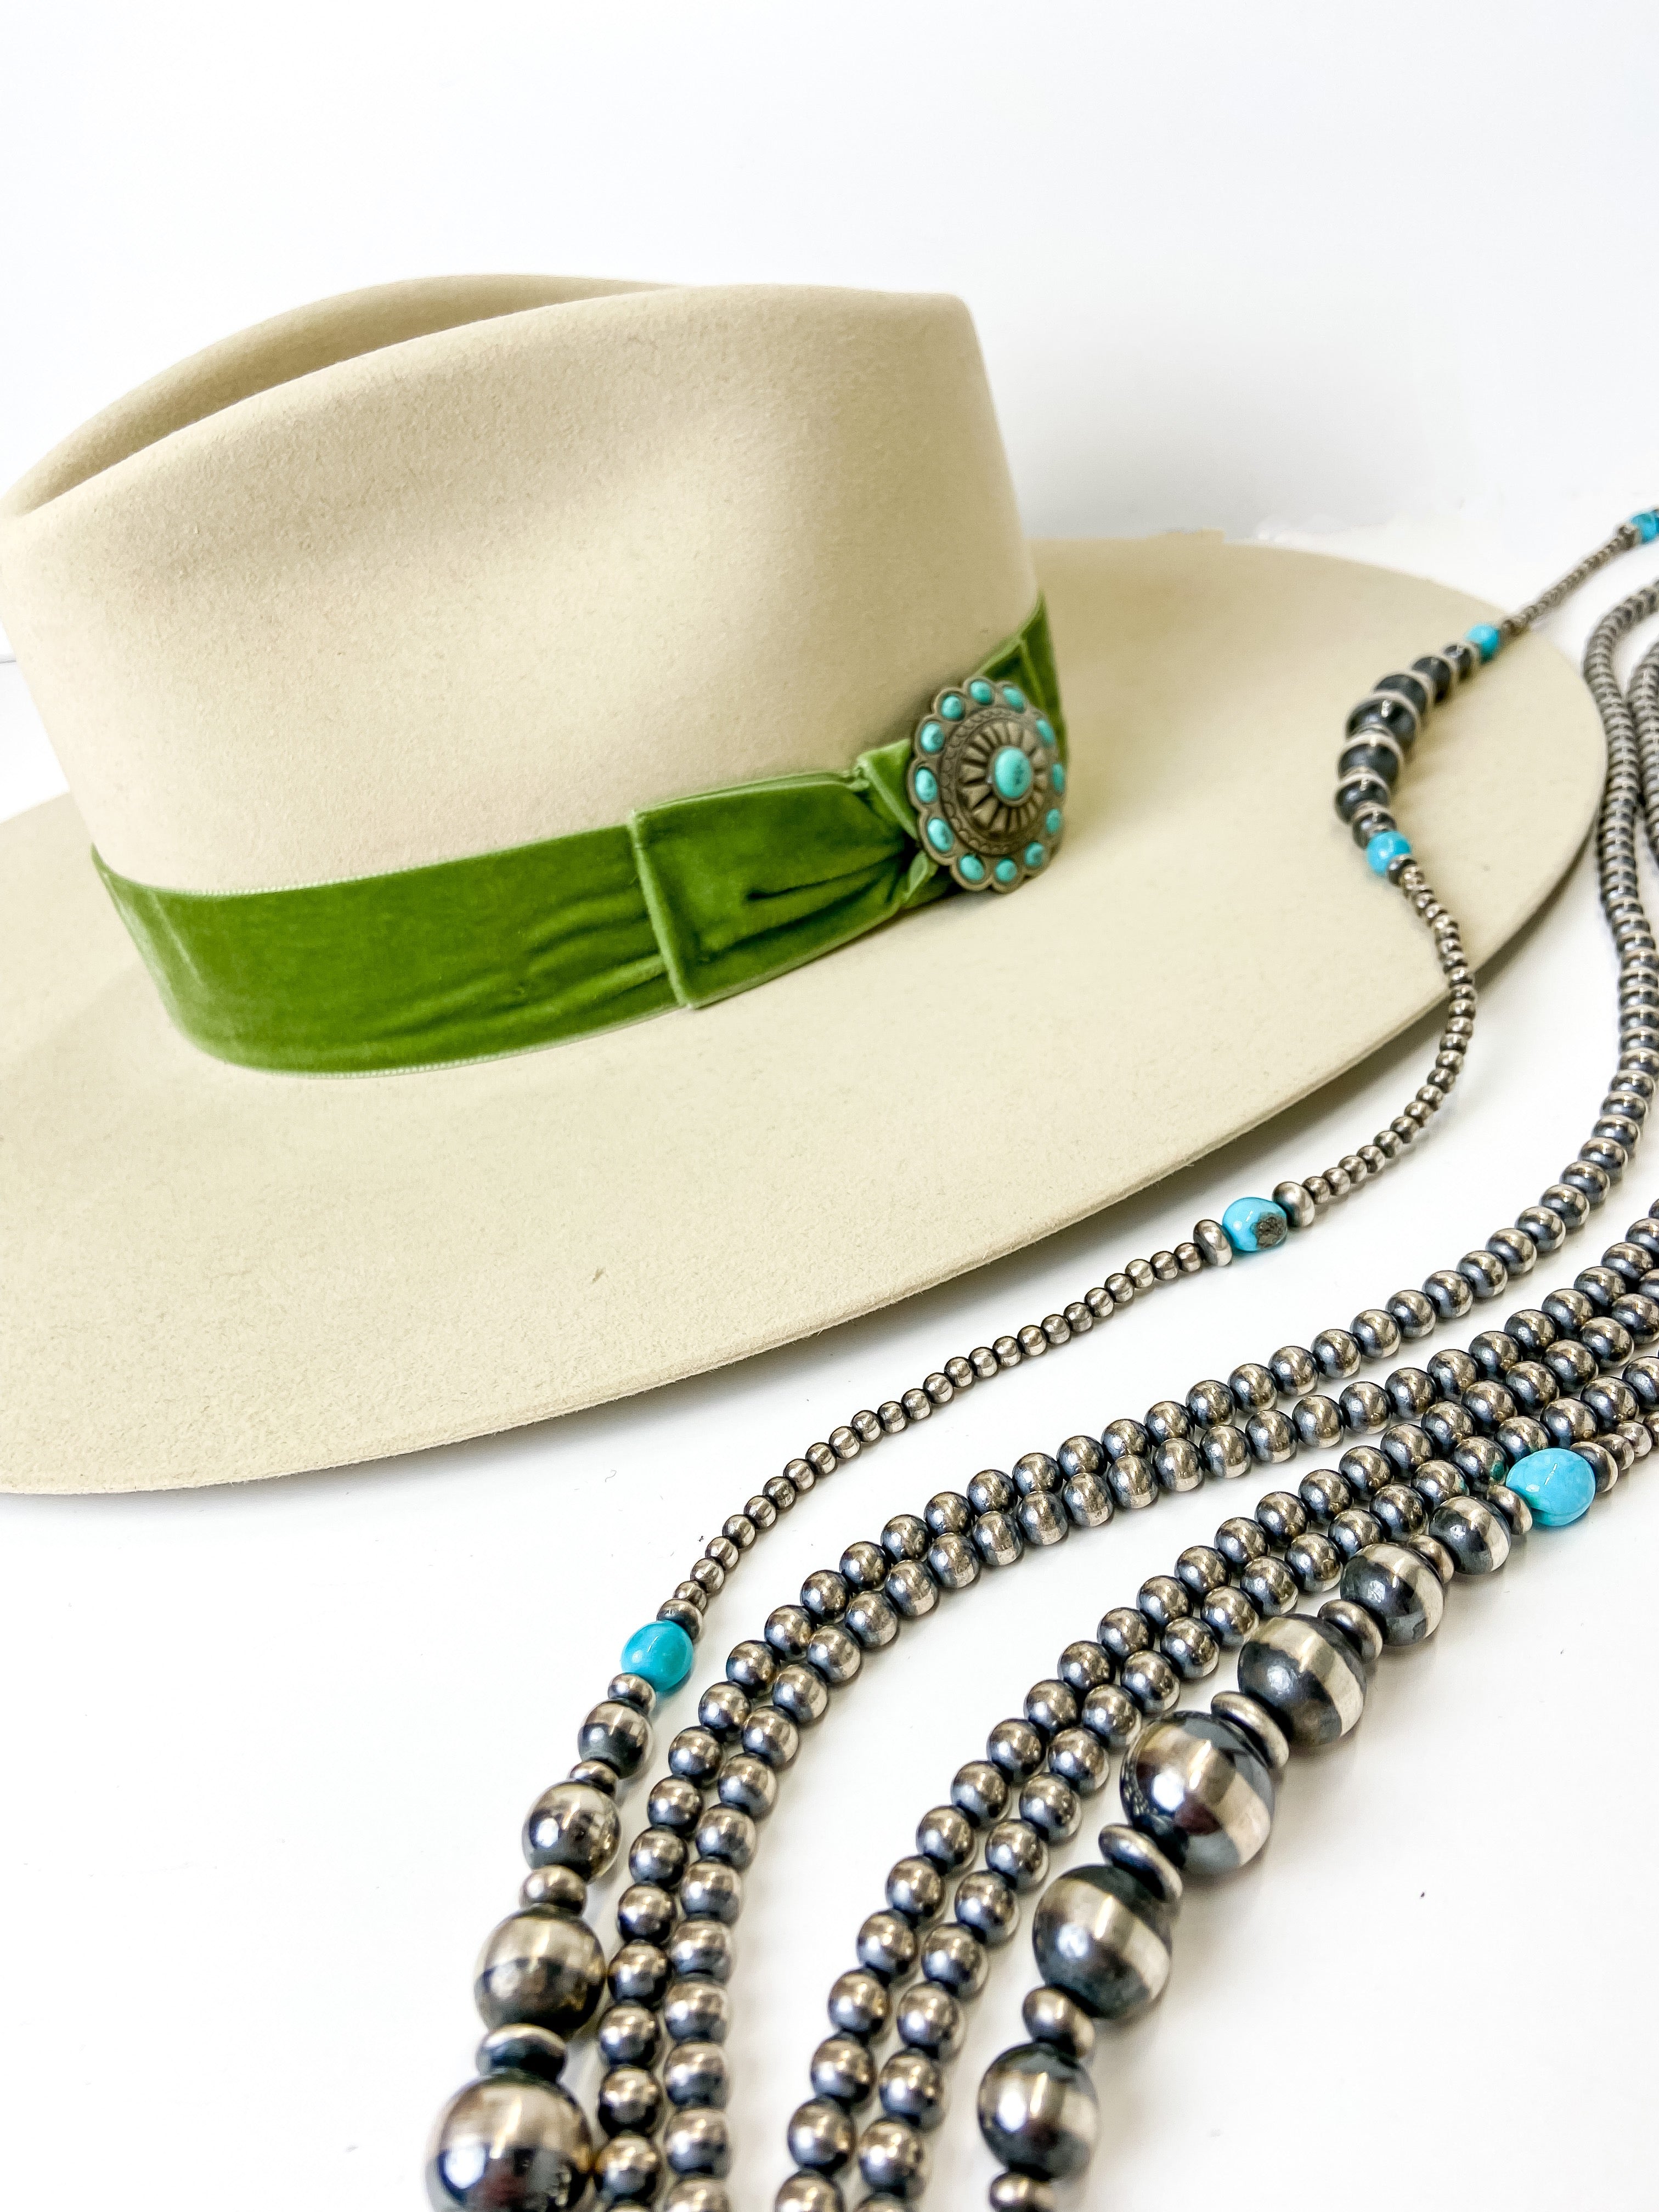 Charlie 1 Horse | Shiloh Wool Felt Hat with Green Velvet Band and Silver Concho in Ivory